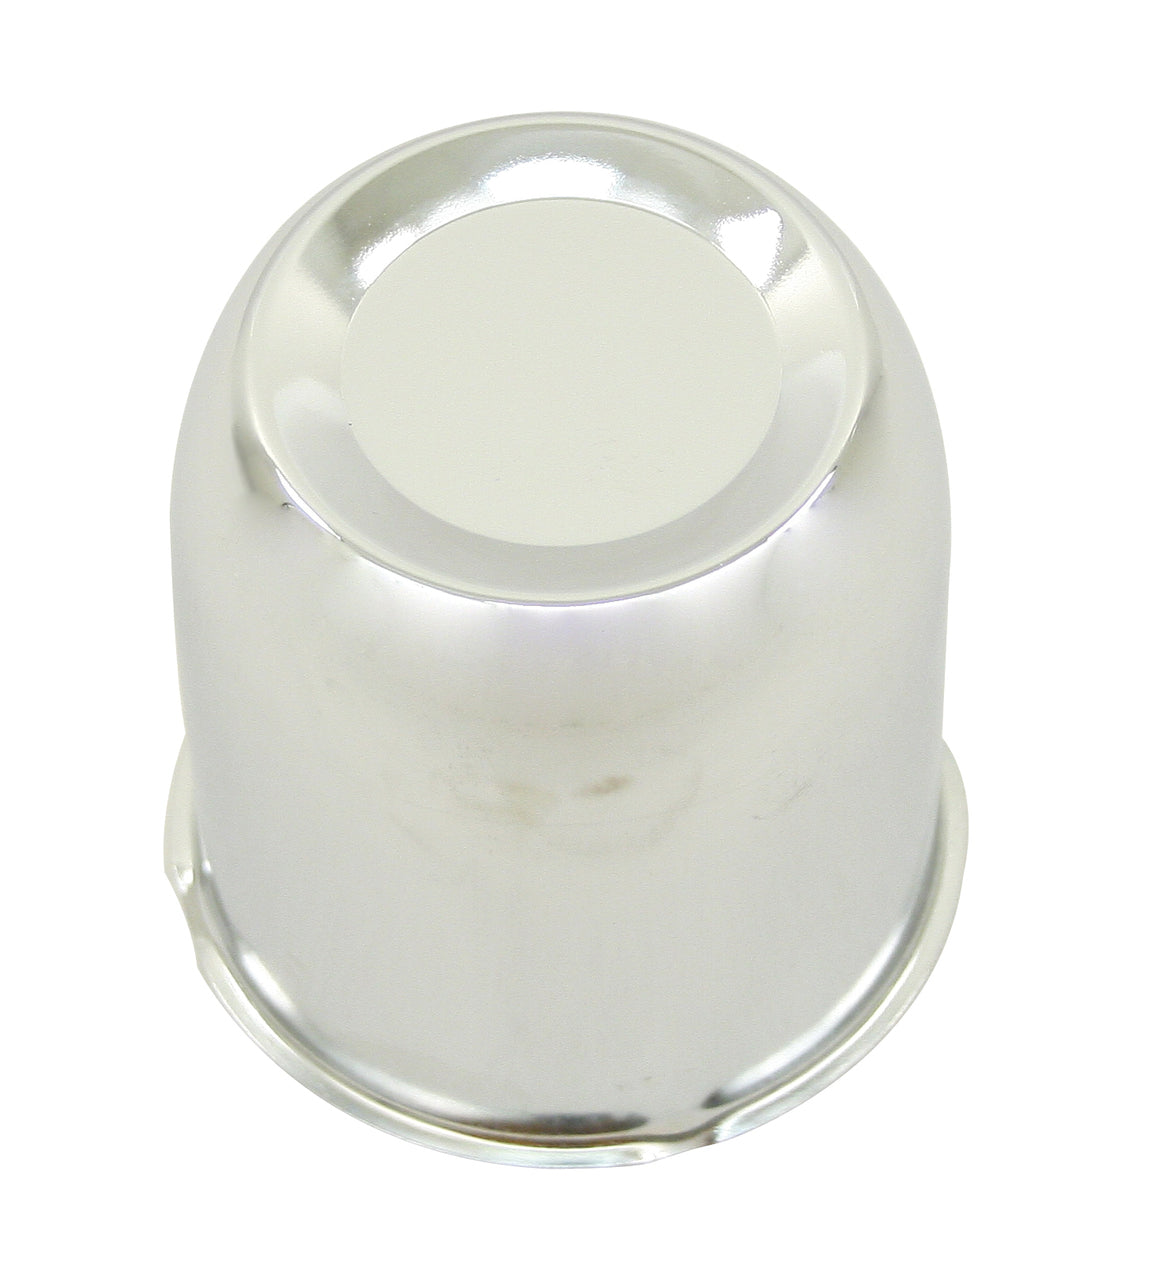 CHROME CENTER WHEEL CAP-FITS ALL WHEELS WITH 3-1/4" HOLE